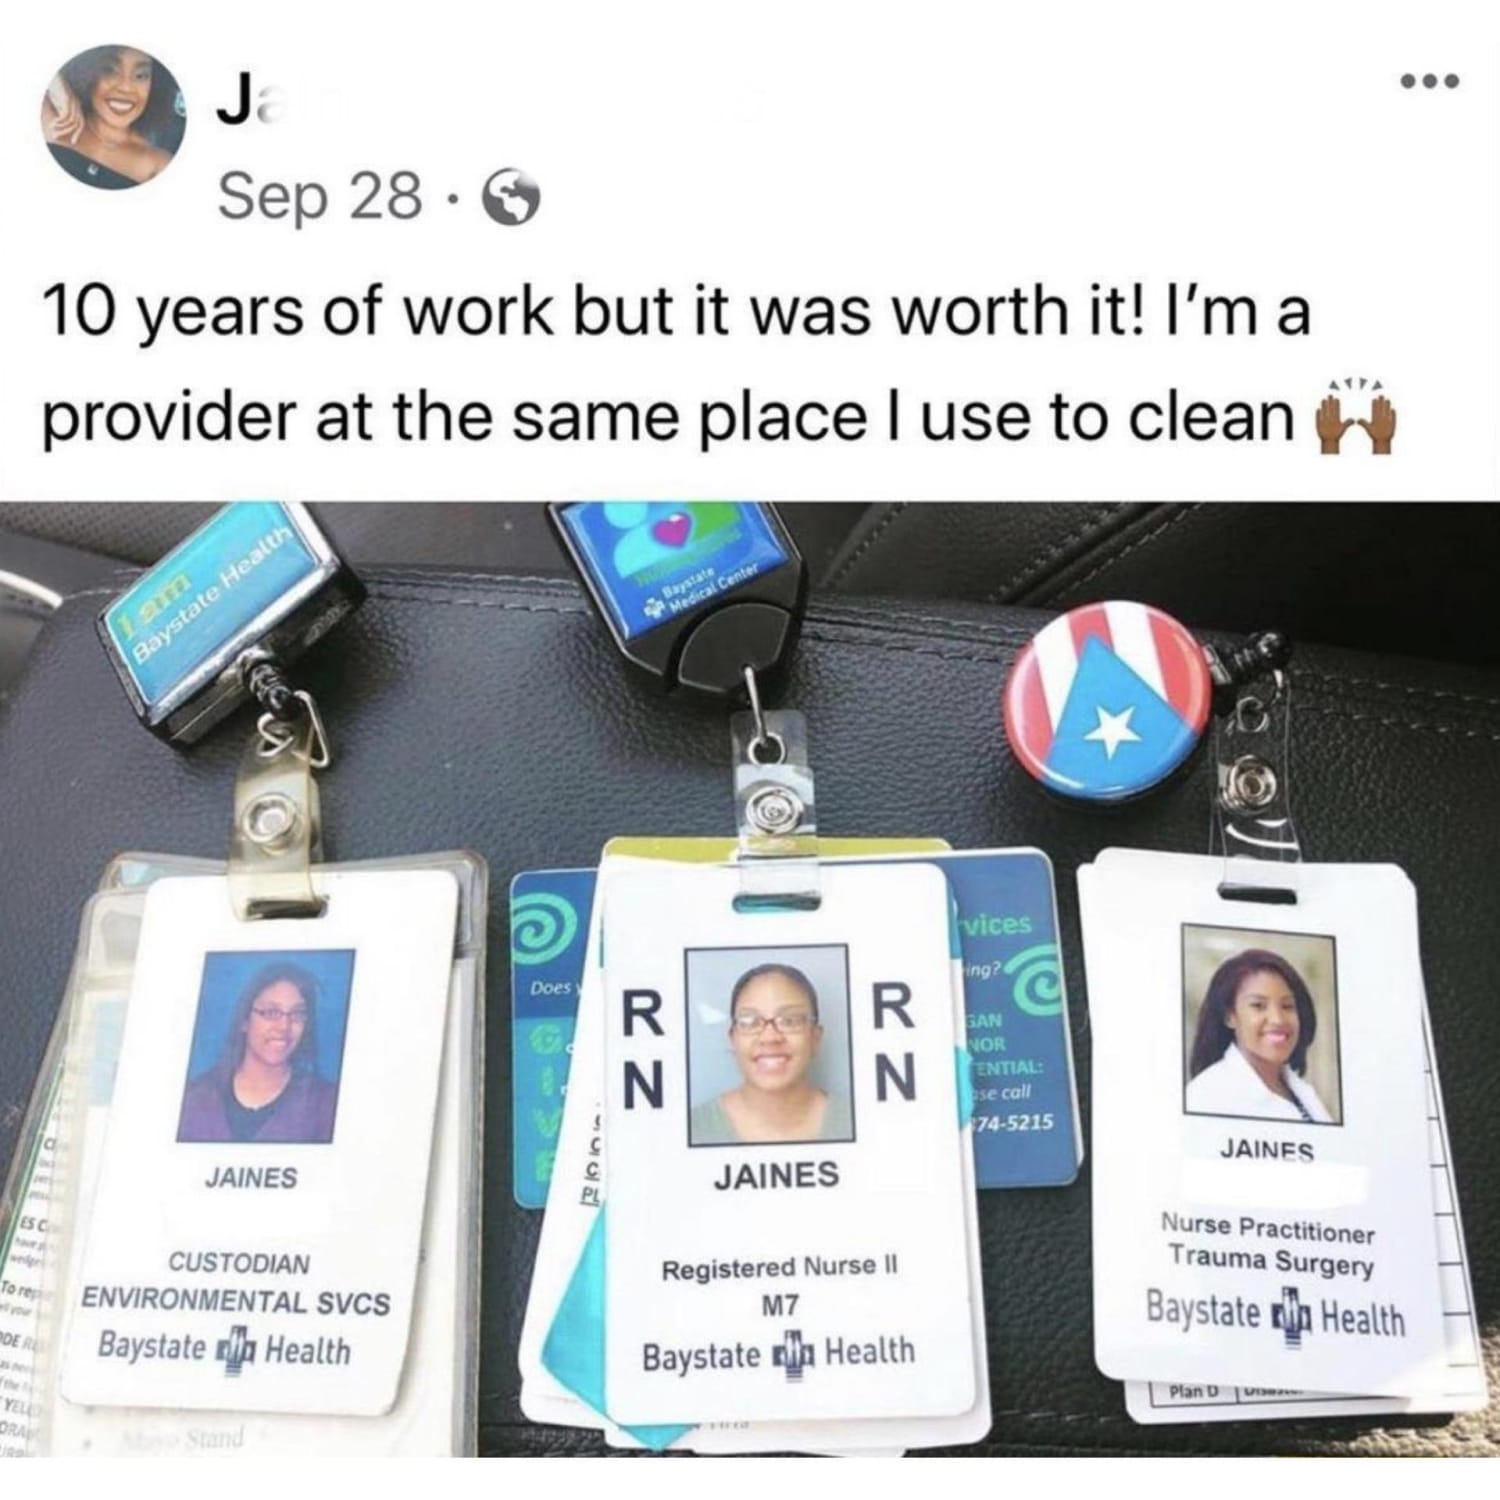 From custodian to nurse practitioner